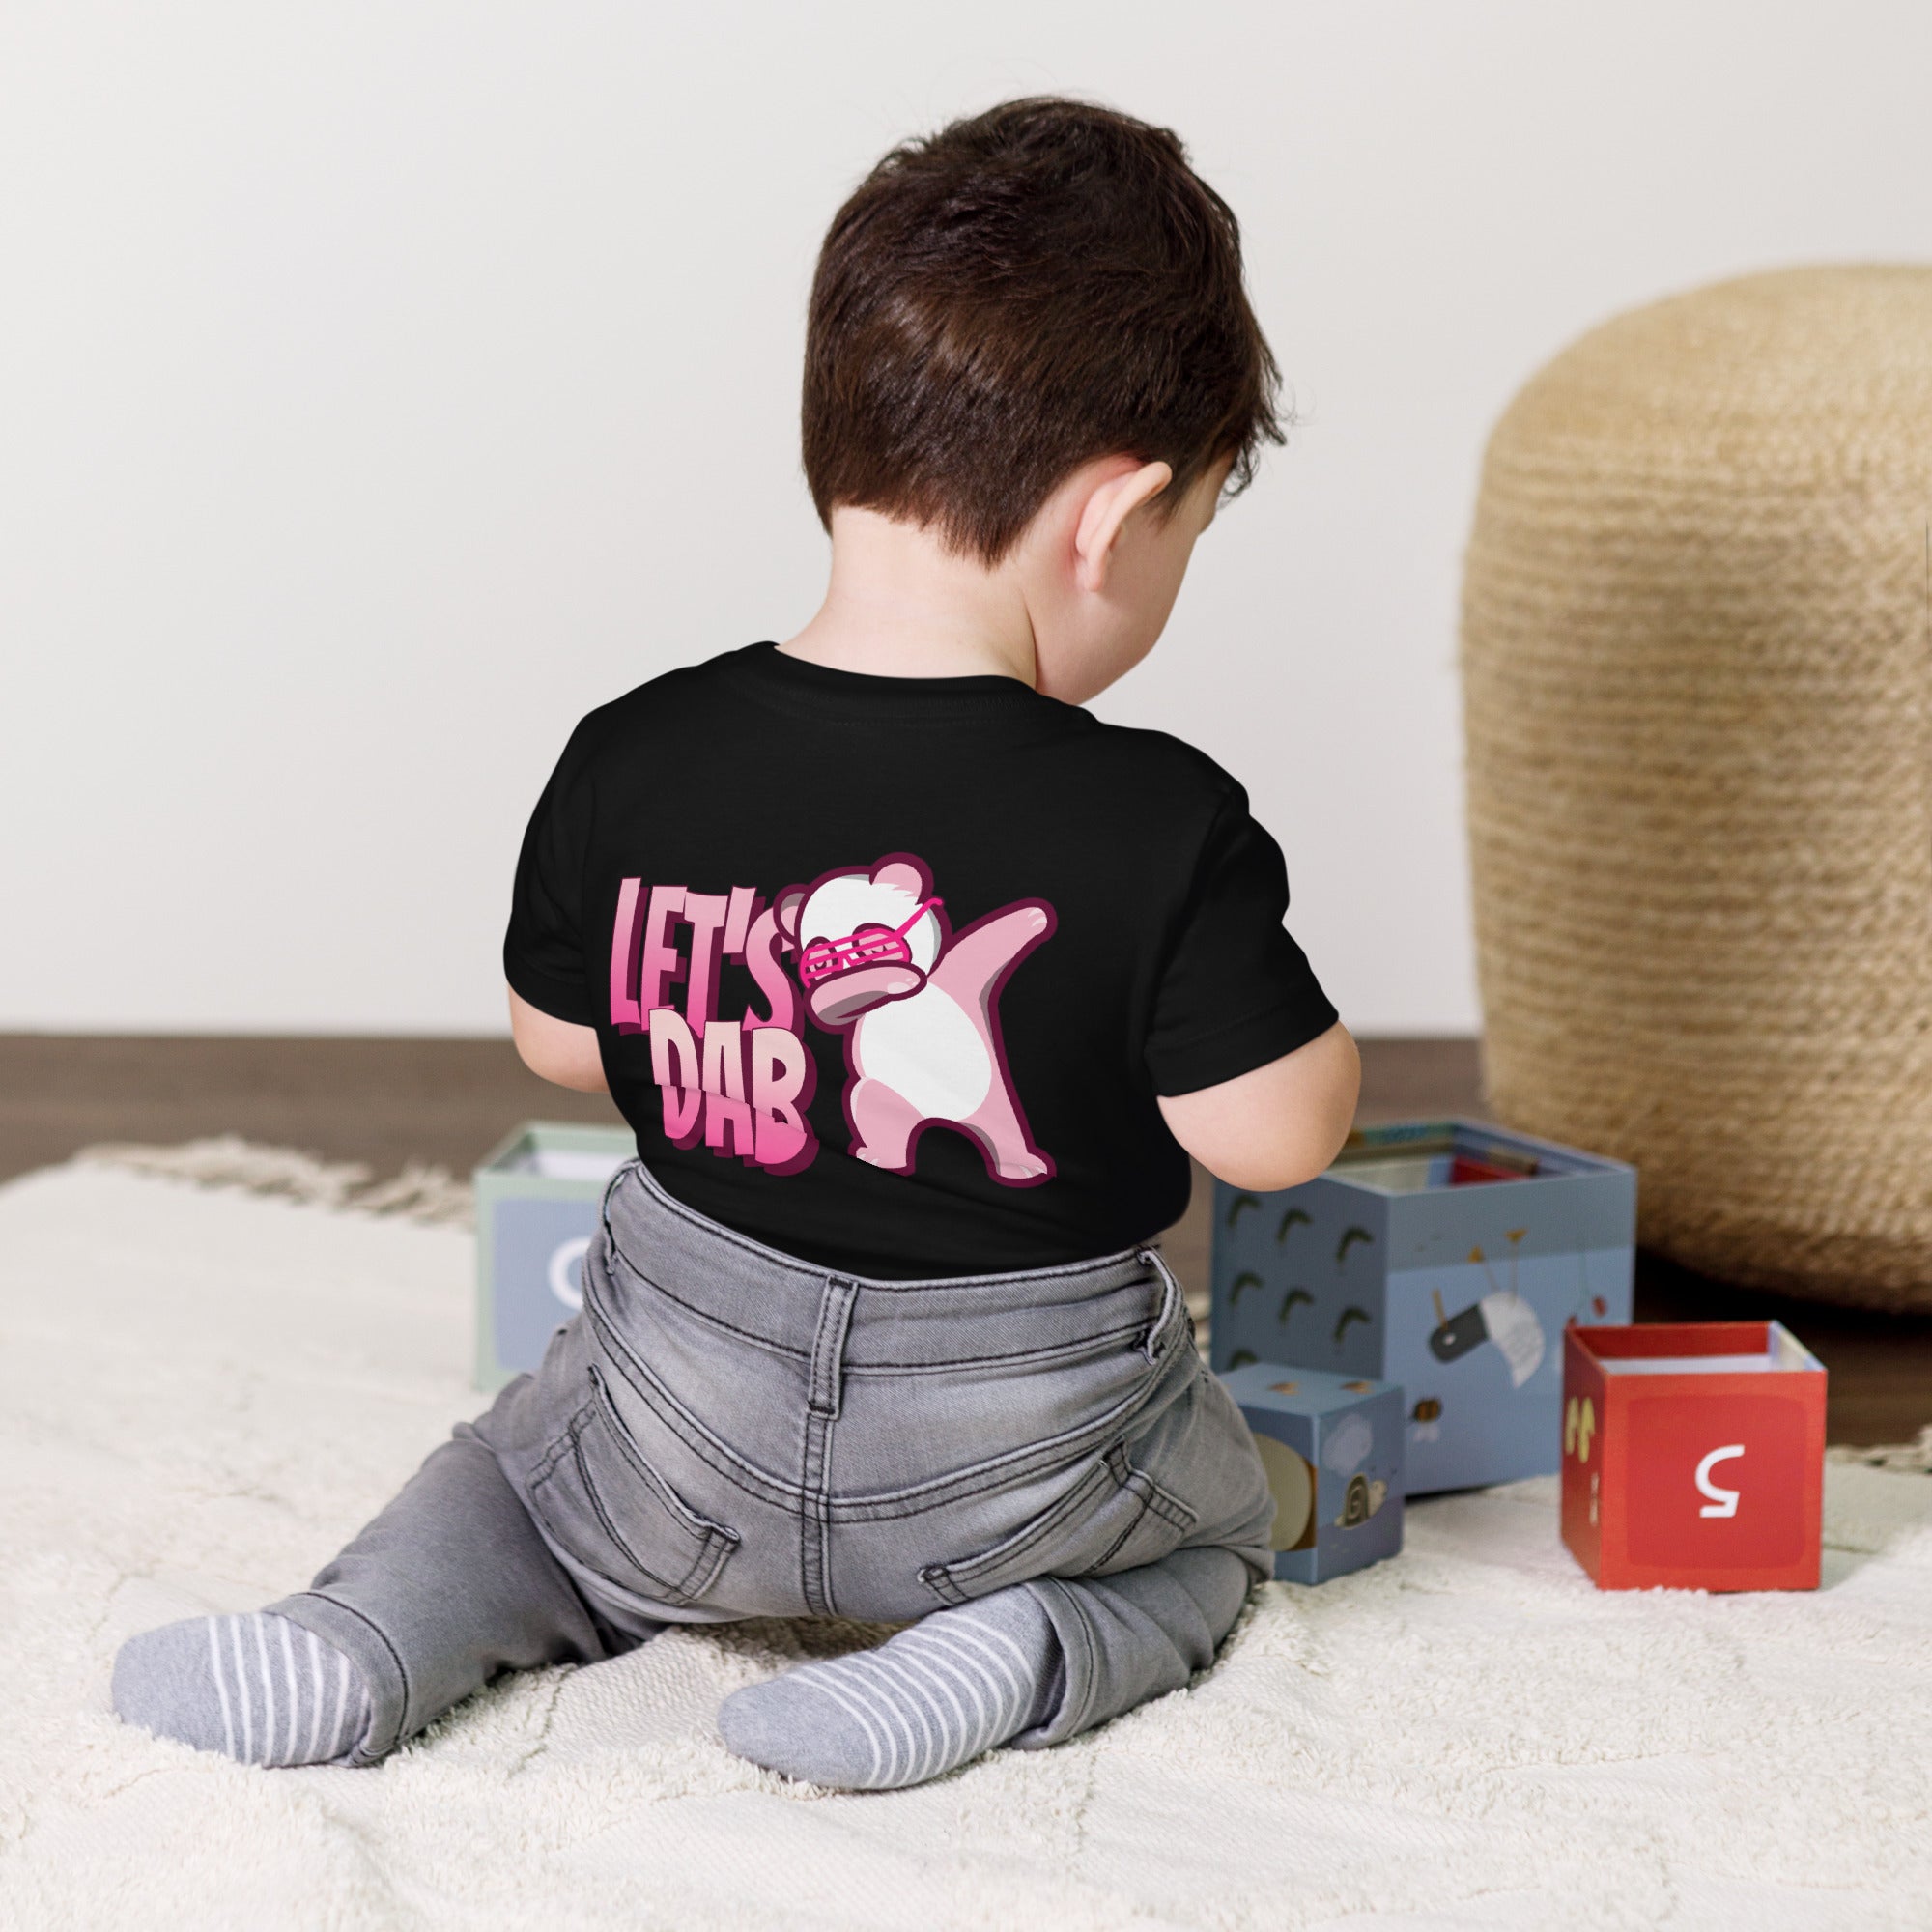 Let's dab - Toddler Short Sleeve Tee (back print)